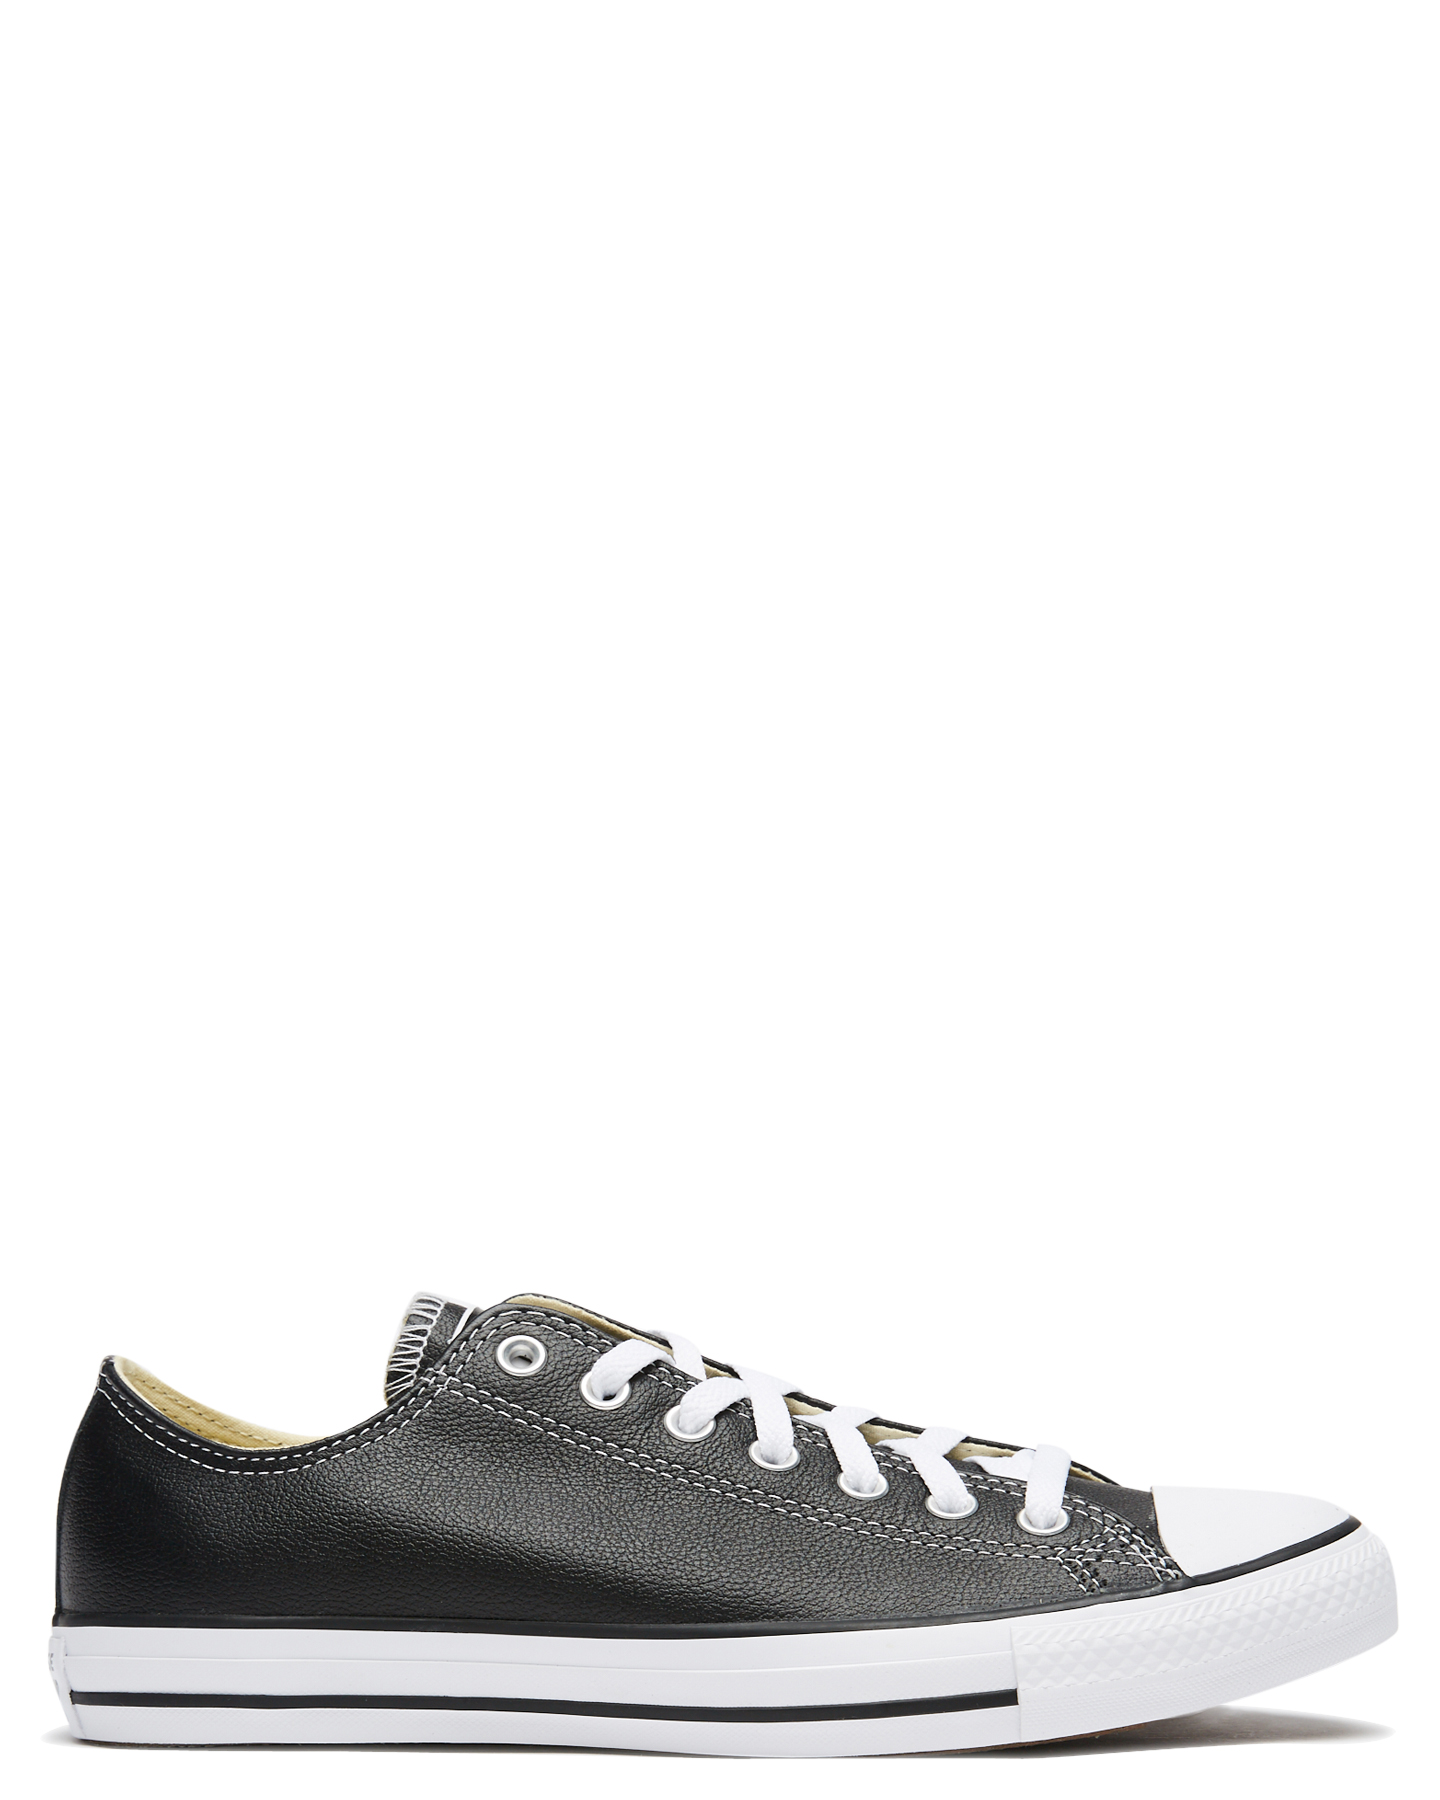 mens leather chuck taylor